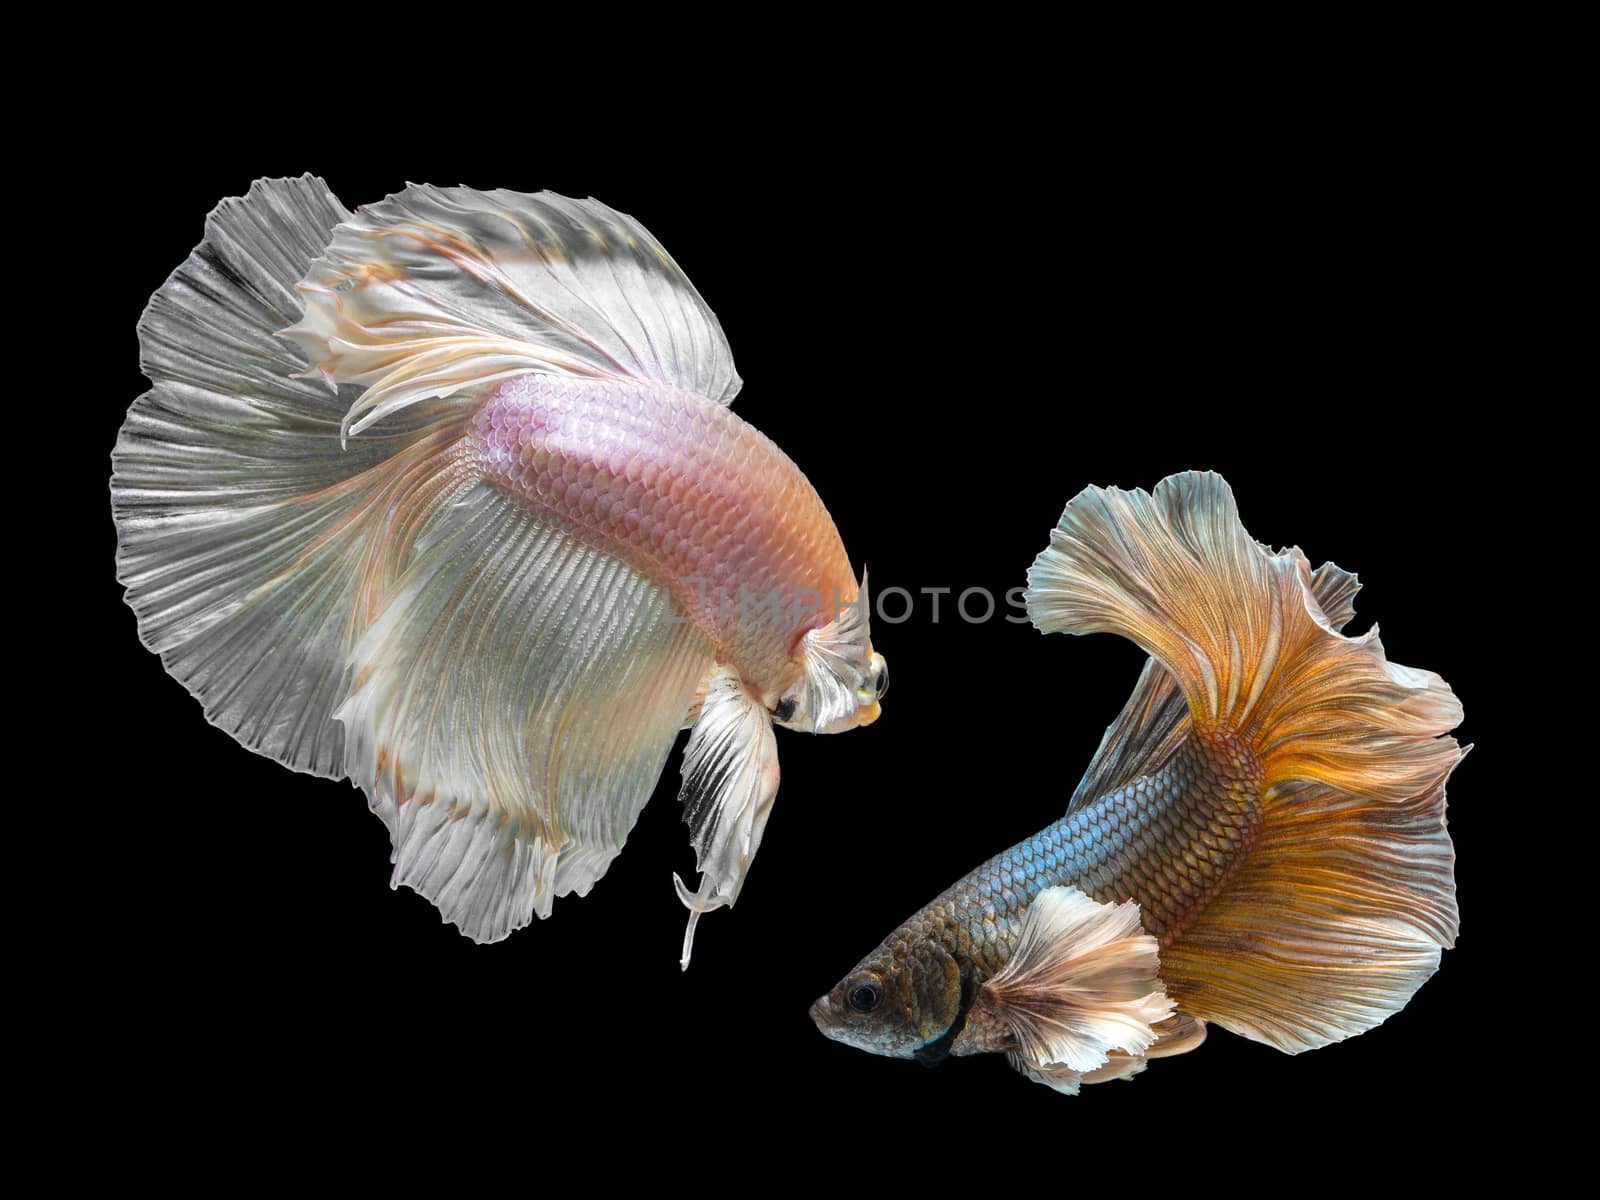 Beautiful movement of two fighting fish on black background by chadchai_k